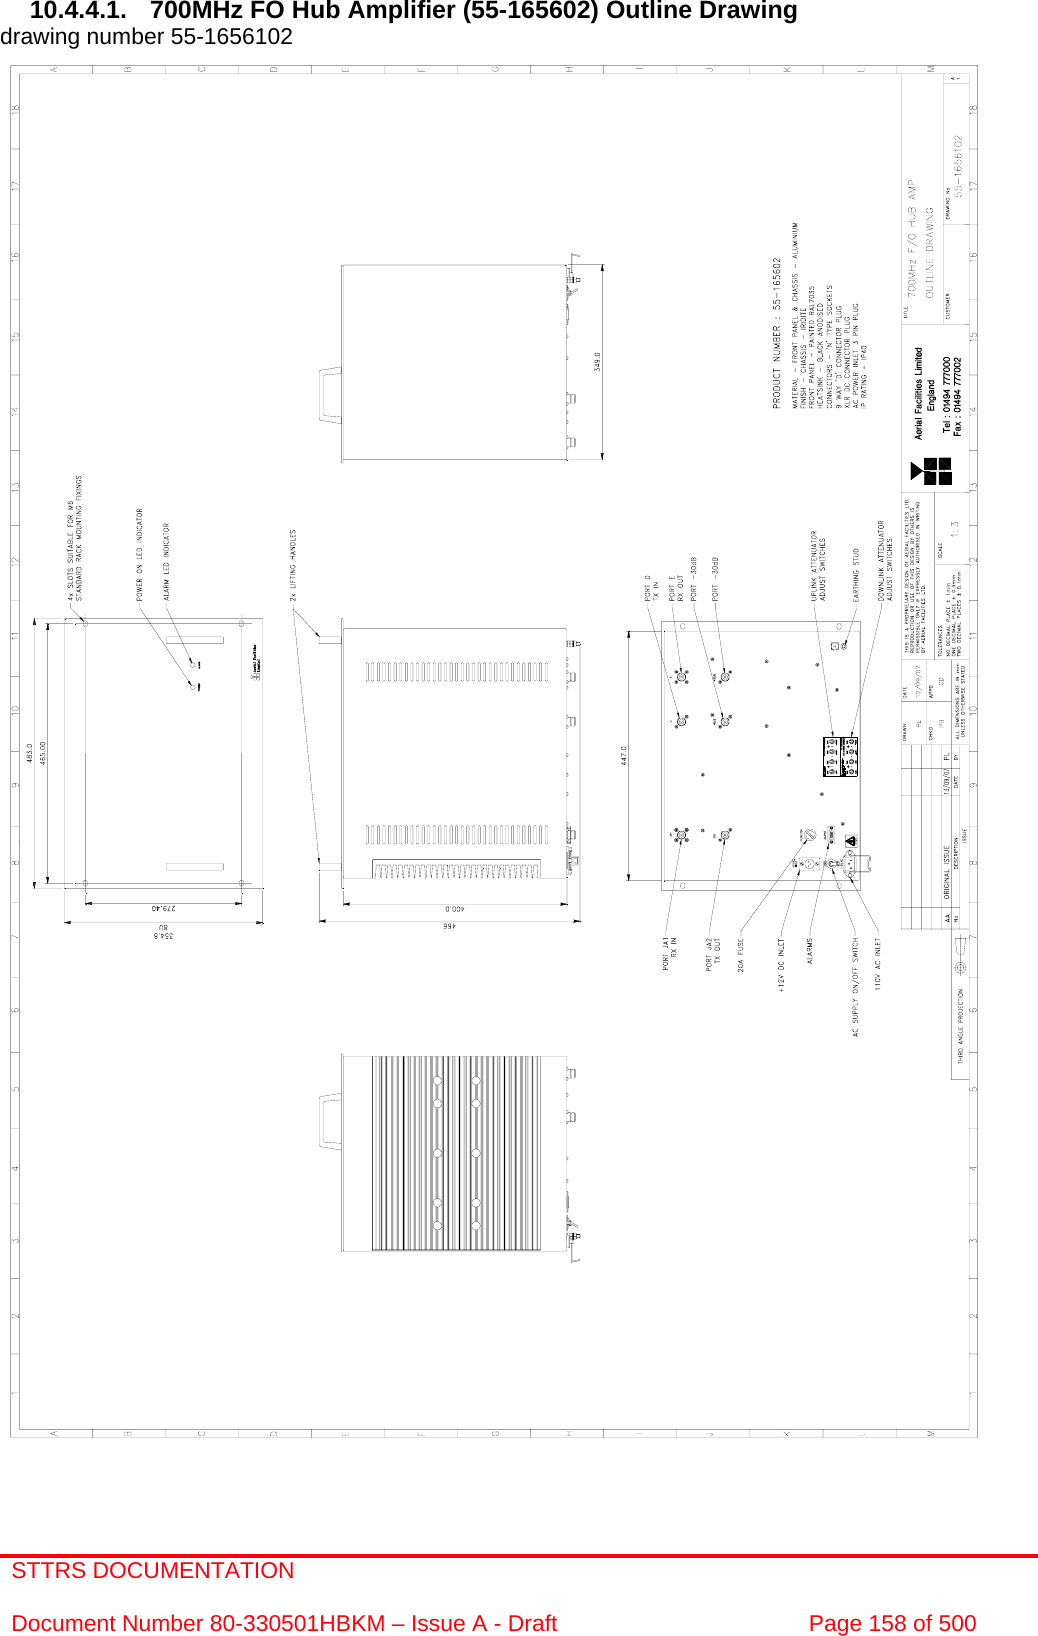 STTRS DOCUMENTATION  Document Number 80-330501HBKM – Issue A - Draft  Page 158 of 500   10.4.4.1.  700MHz FO Hub Amplifier (55-165602) Outline Drawing drawing number 55-1656102                                                  